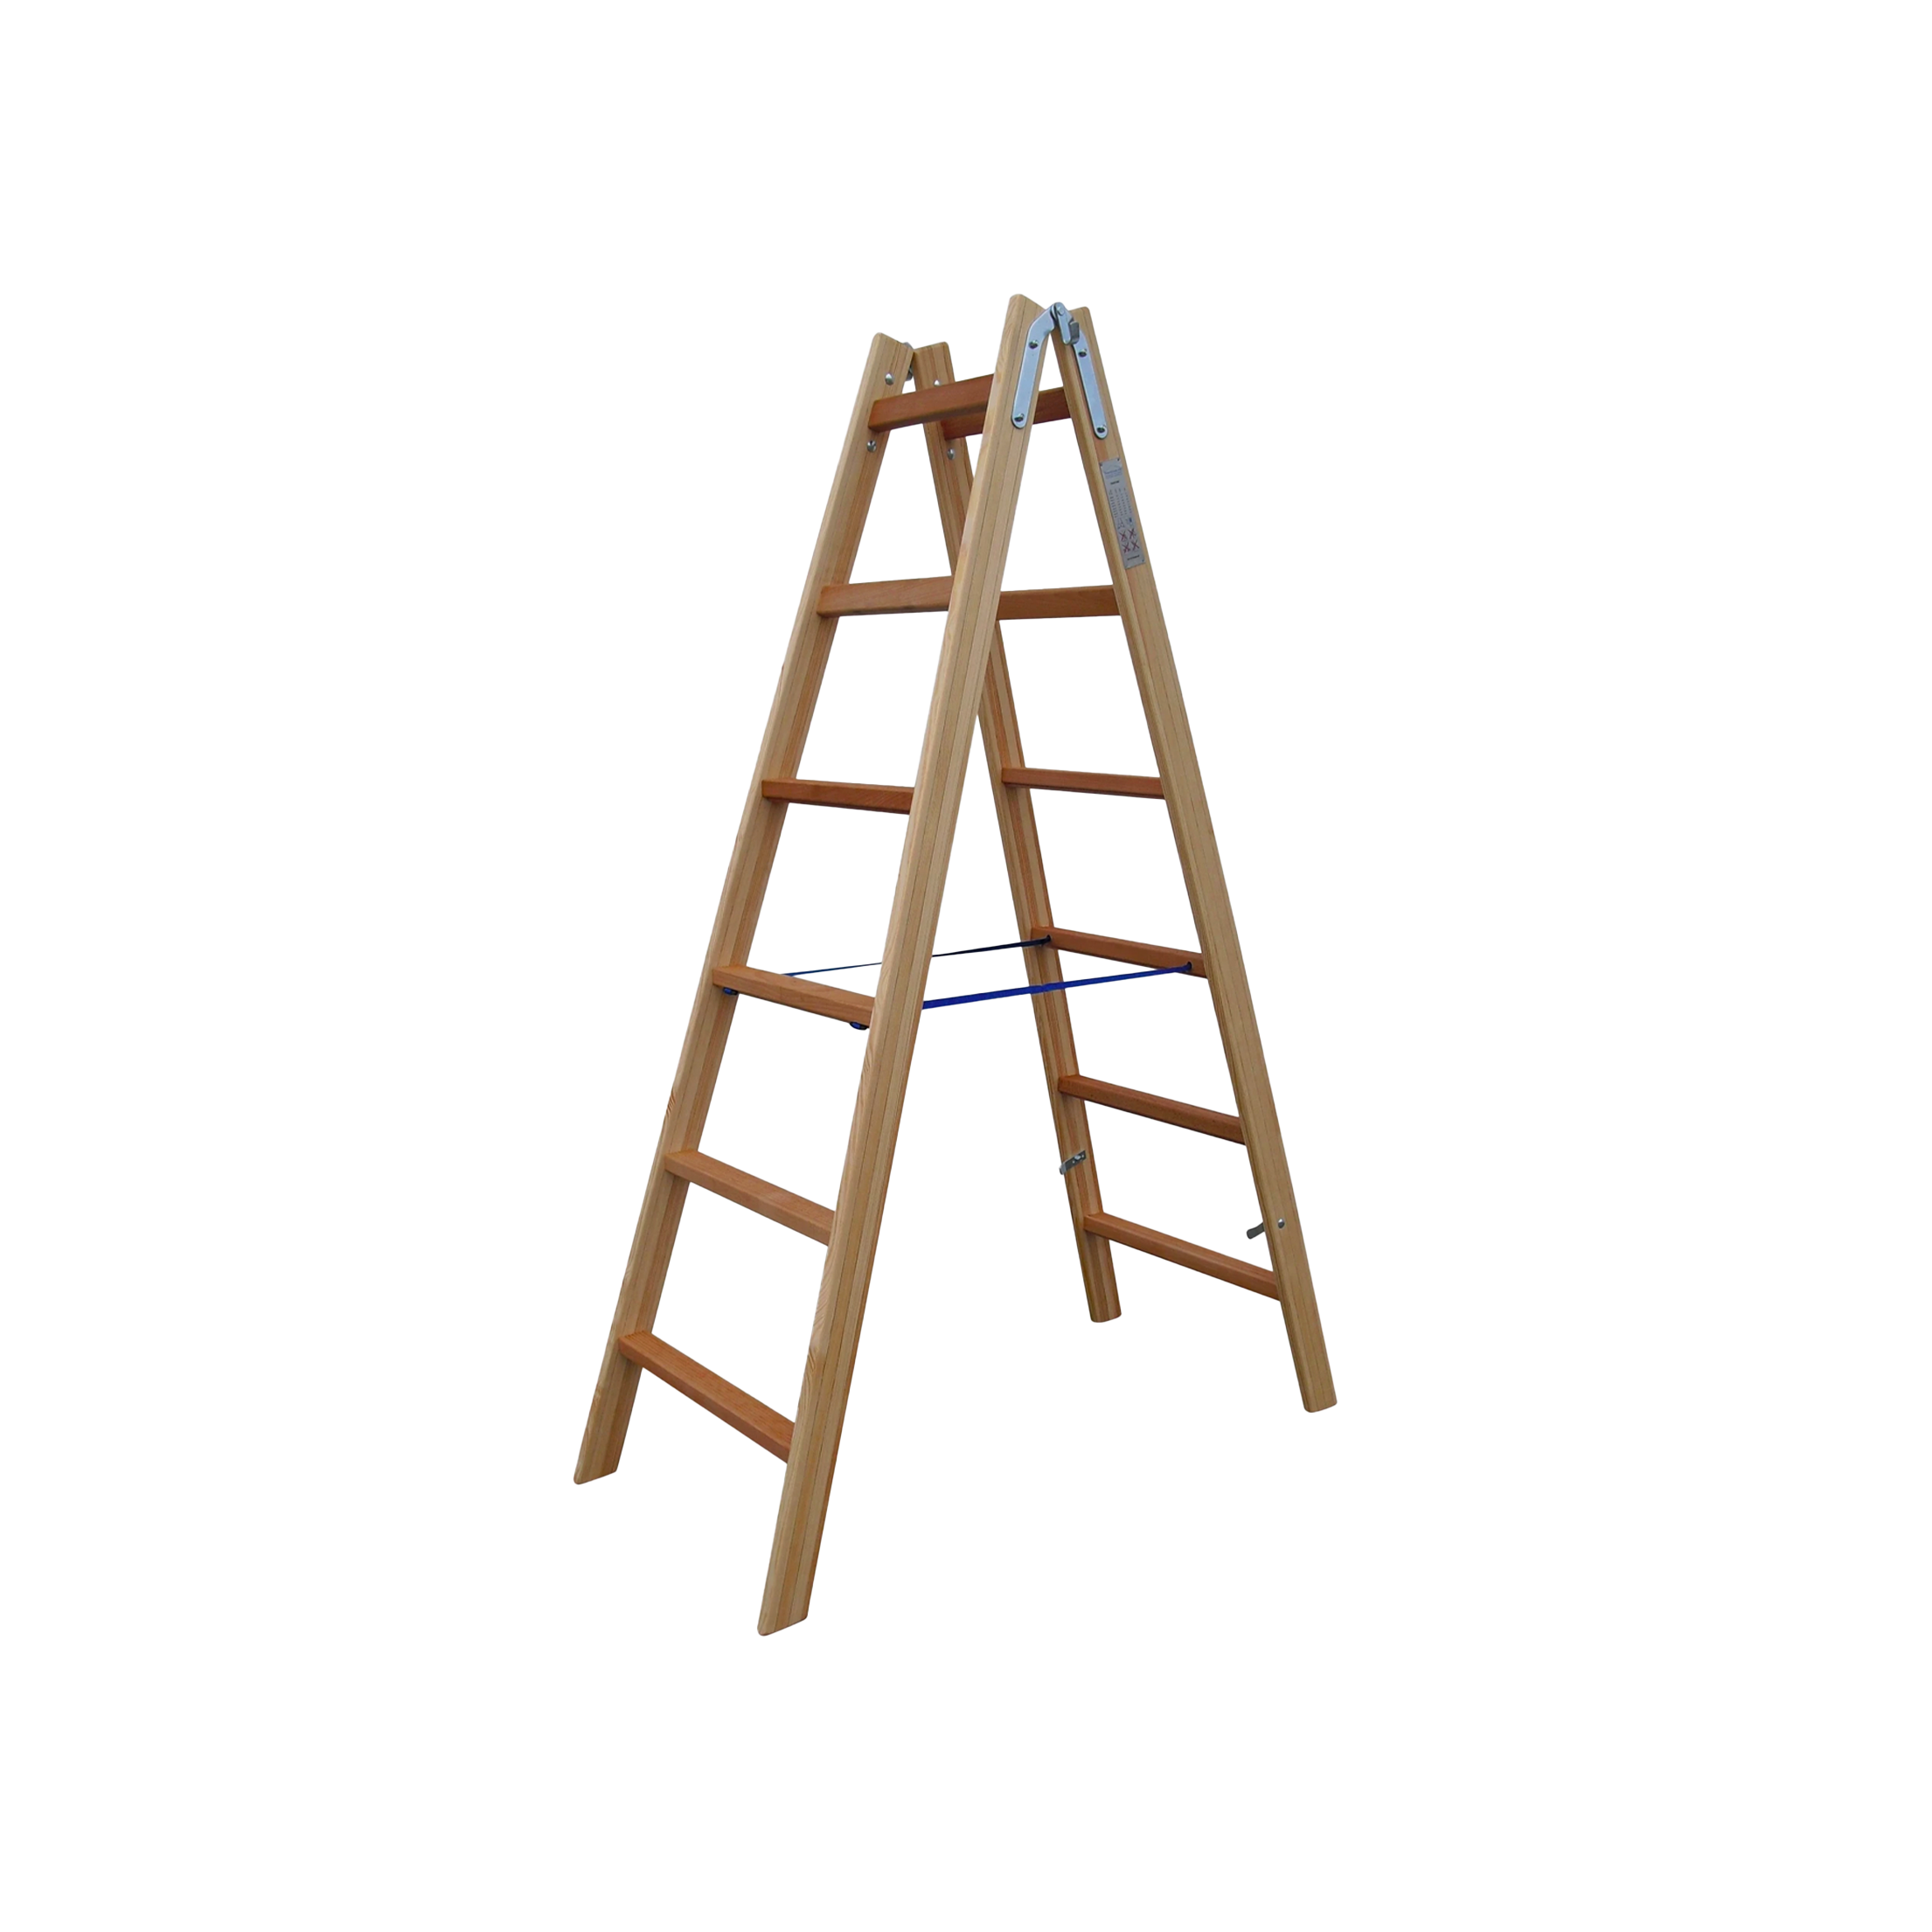 Laminated Viennese ladder with solid rung